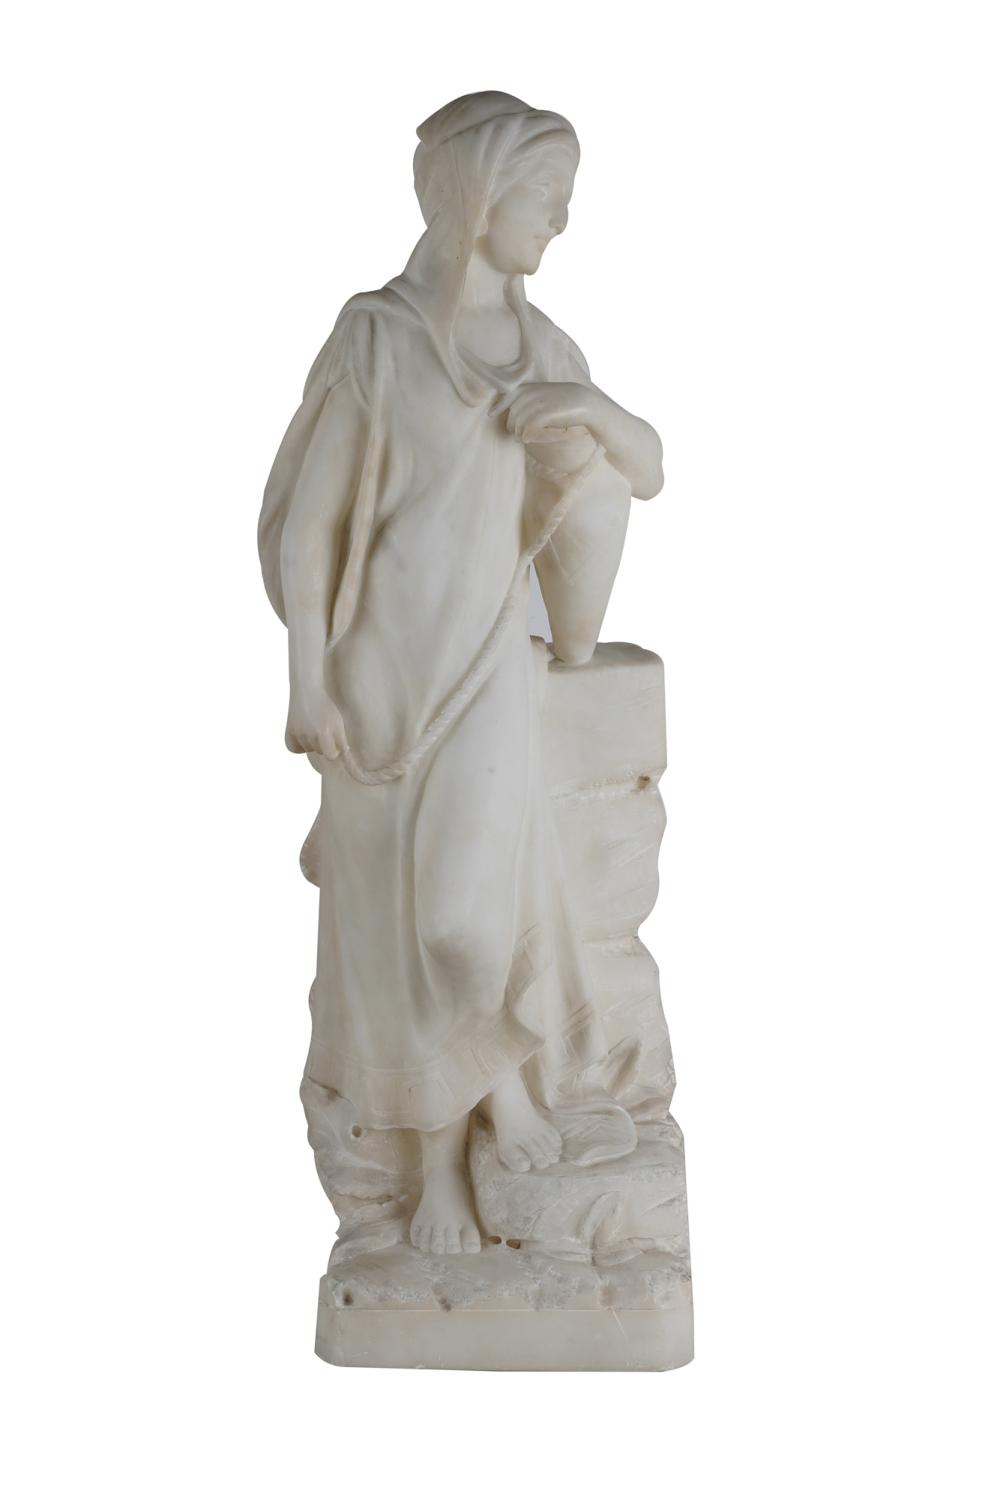 ALABASTER FIGURE OF REBECCA AT THE WELL26